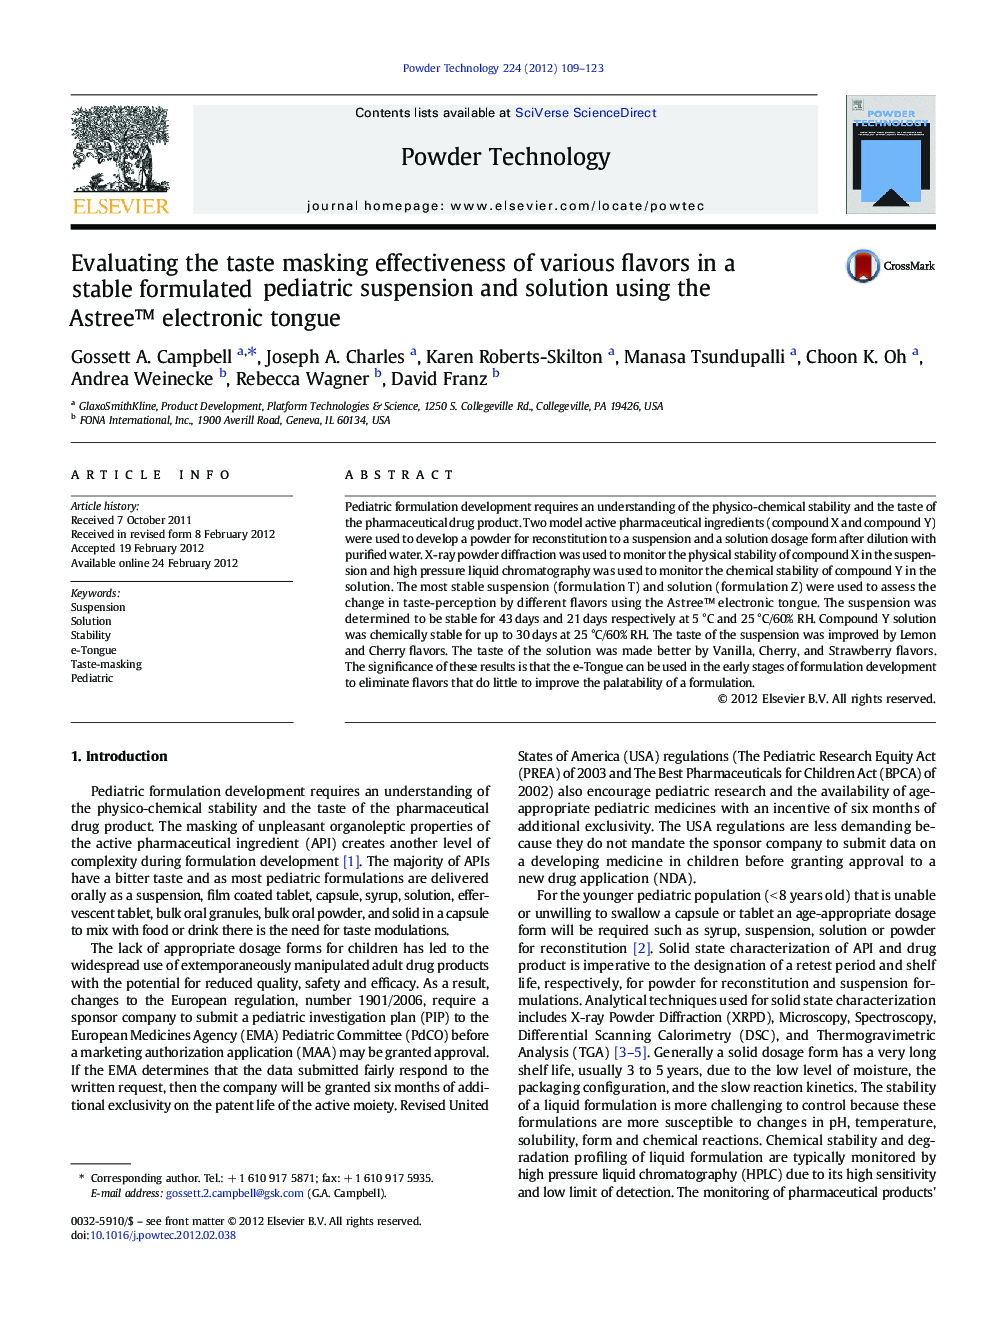 Evaluating the taste masking effectiveness of various flavors in a stable formulated pediatric suspension and solution using the Astree™ electronic tongue